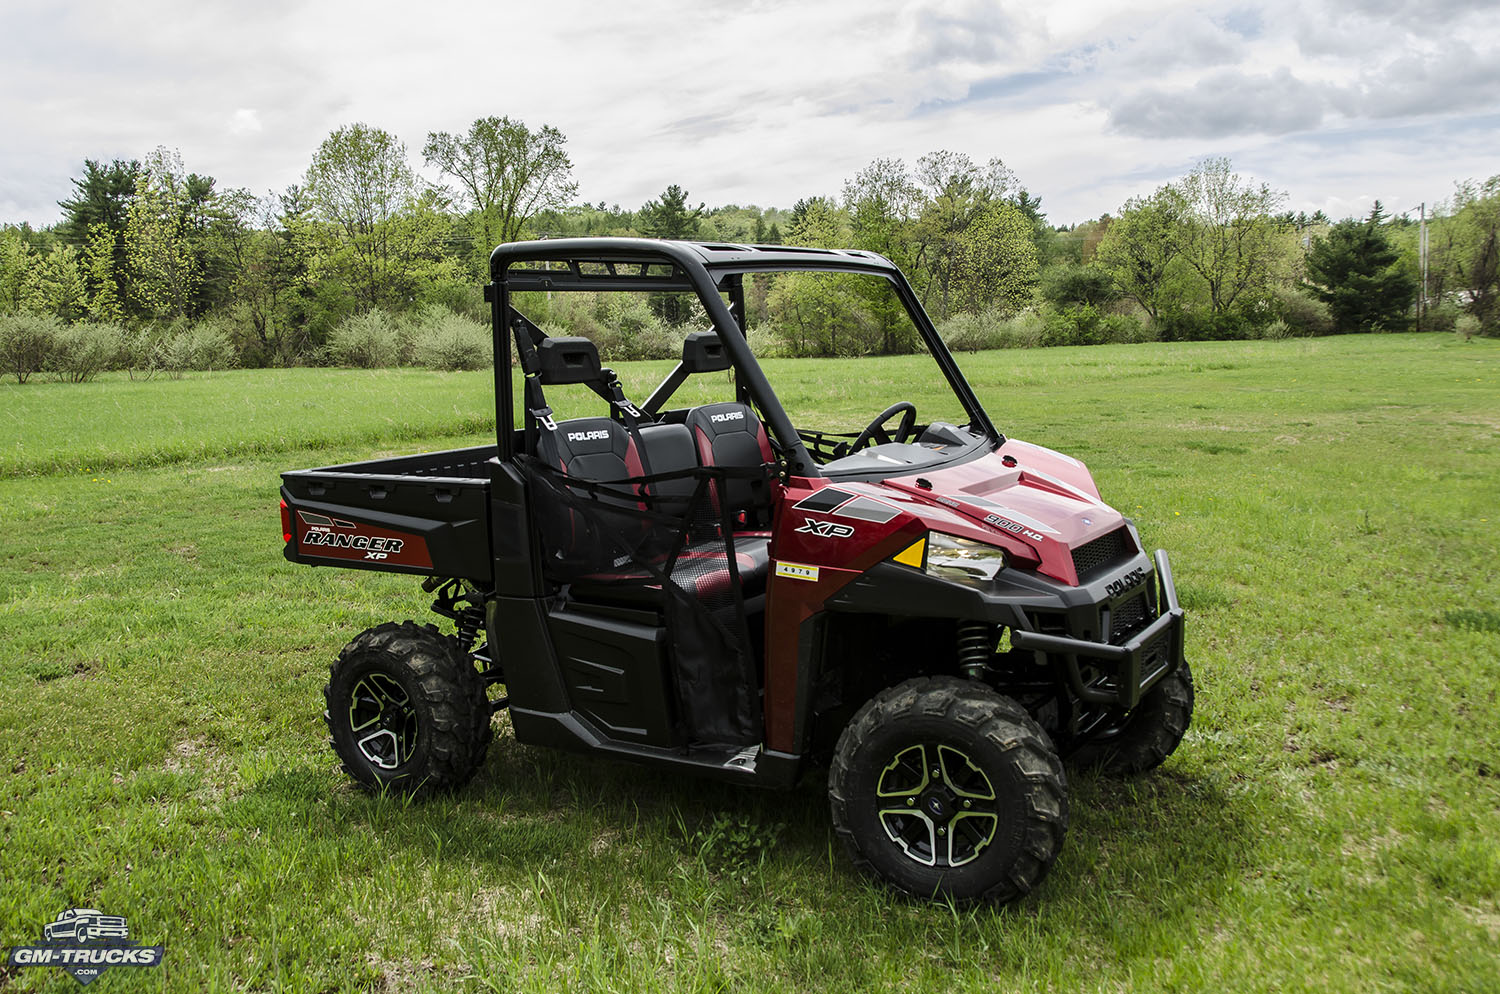 More information about "Polaris offering big discounts to Costco Auto members"